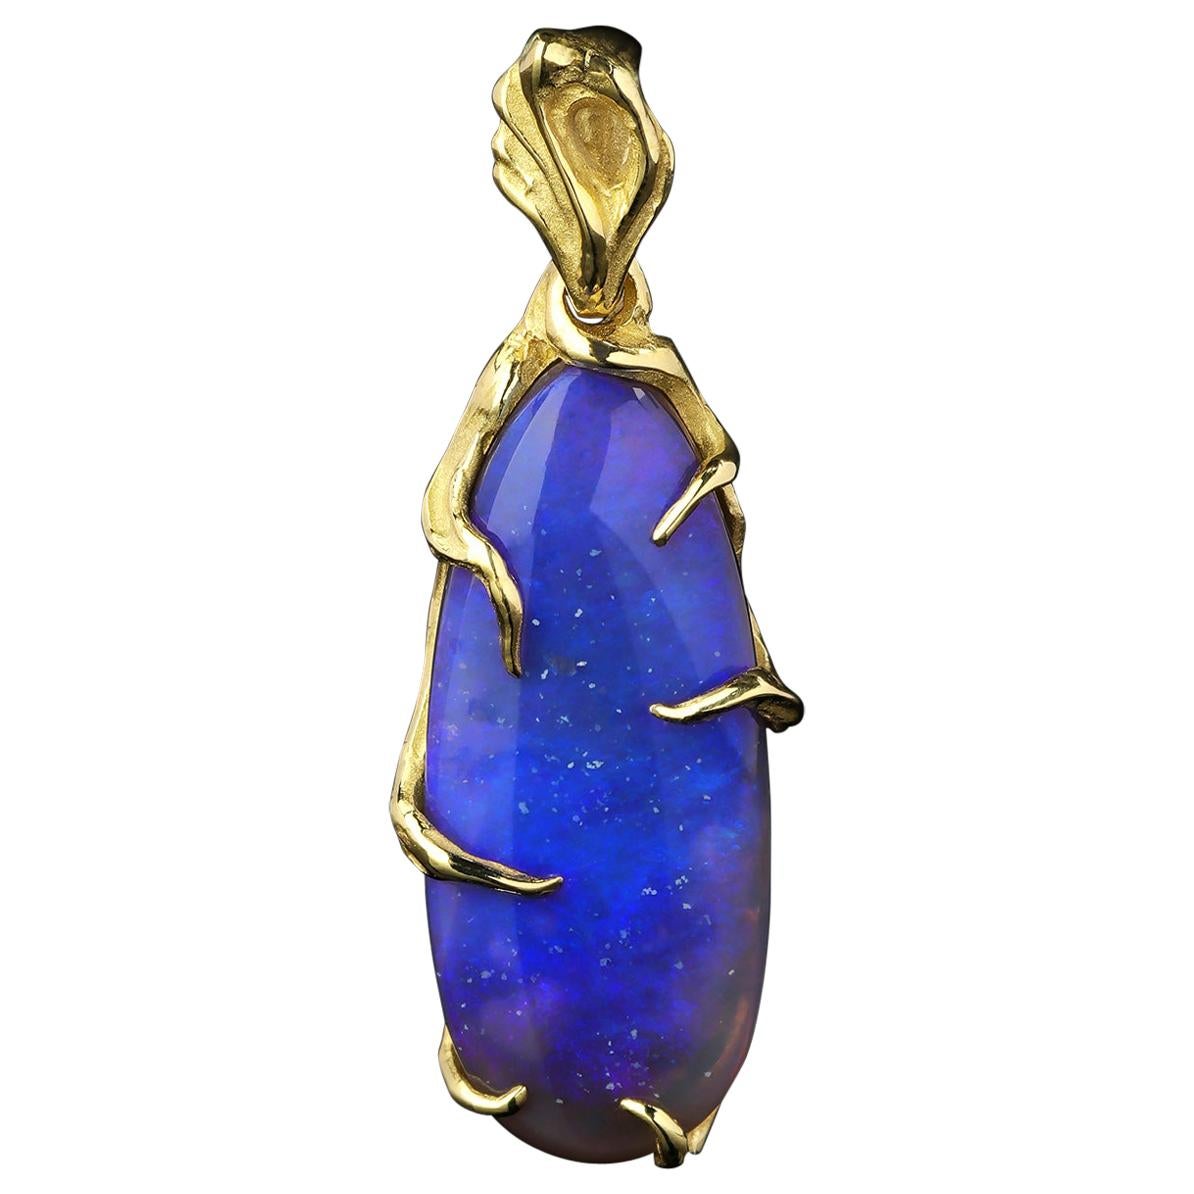 Milky way - 14K yellow gold pendant with natural Opal
opal origin - Australia
opal measurements - 0.16 x 0.35 x 0.87 in / 4 х 9 х 22 mm
opal weight - 6.75 carats
pendant length - 1.26 in / 32 mm
pendant weight - 3.47 grams


We ship our jewelry